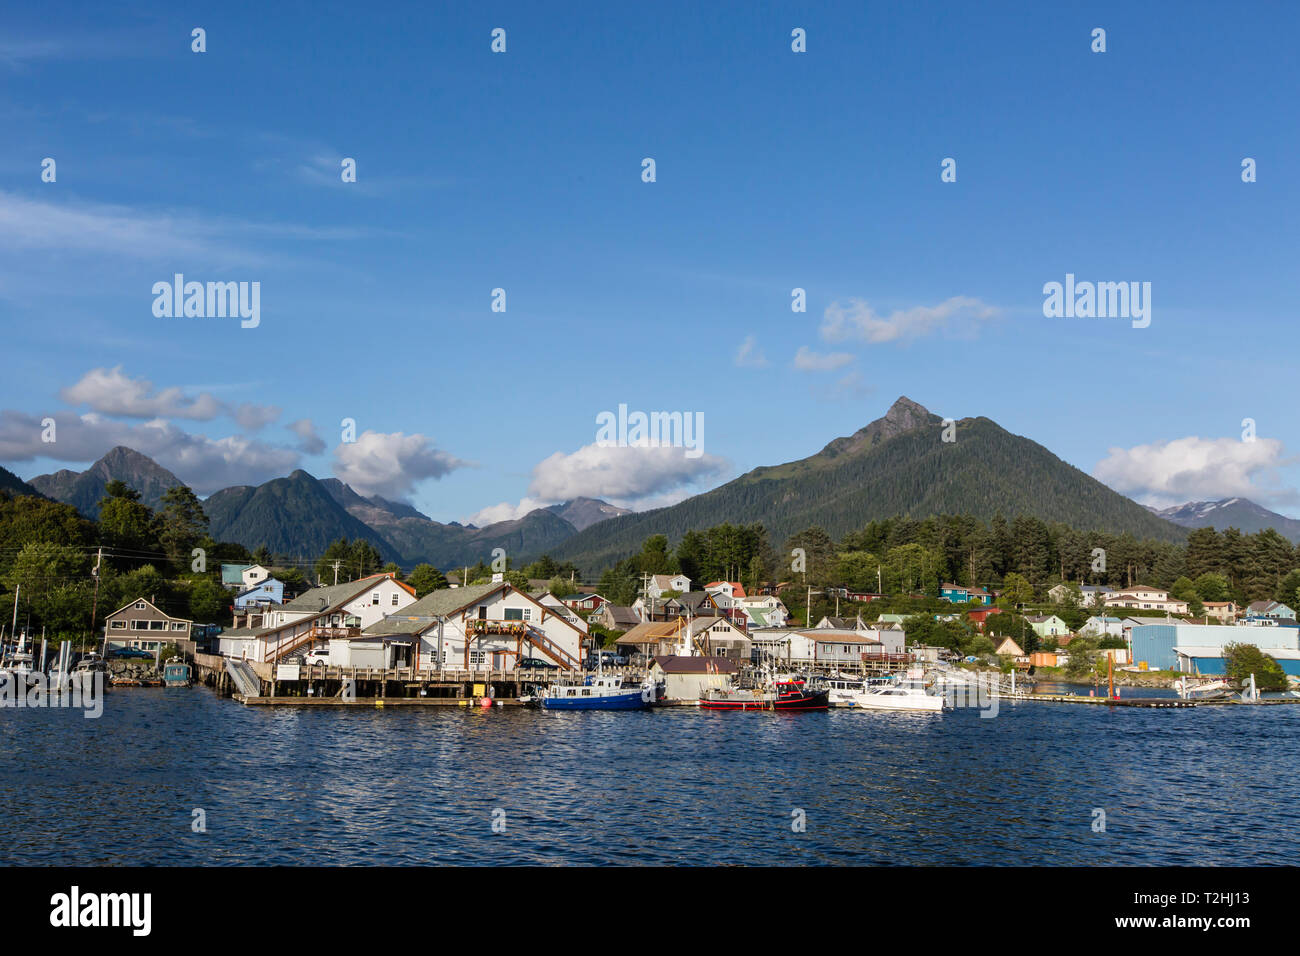 A view of the commercial fishing docks and waterfront in Sitka, Baranof Island, Southeast Alaska, United States of America Stock Photo